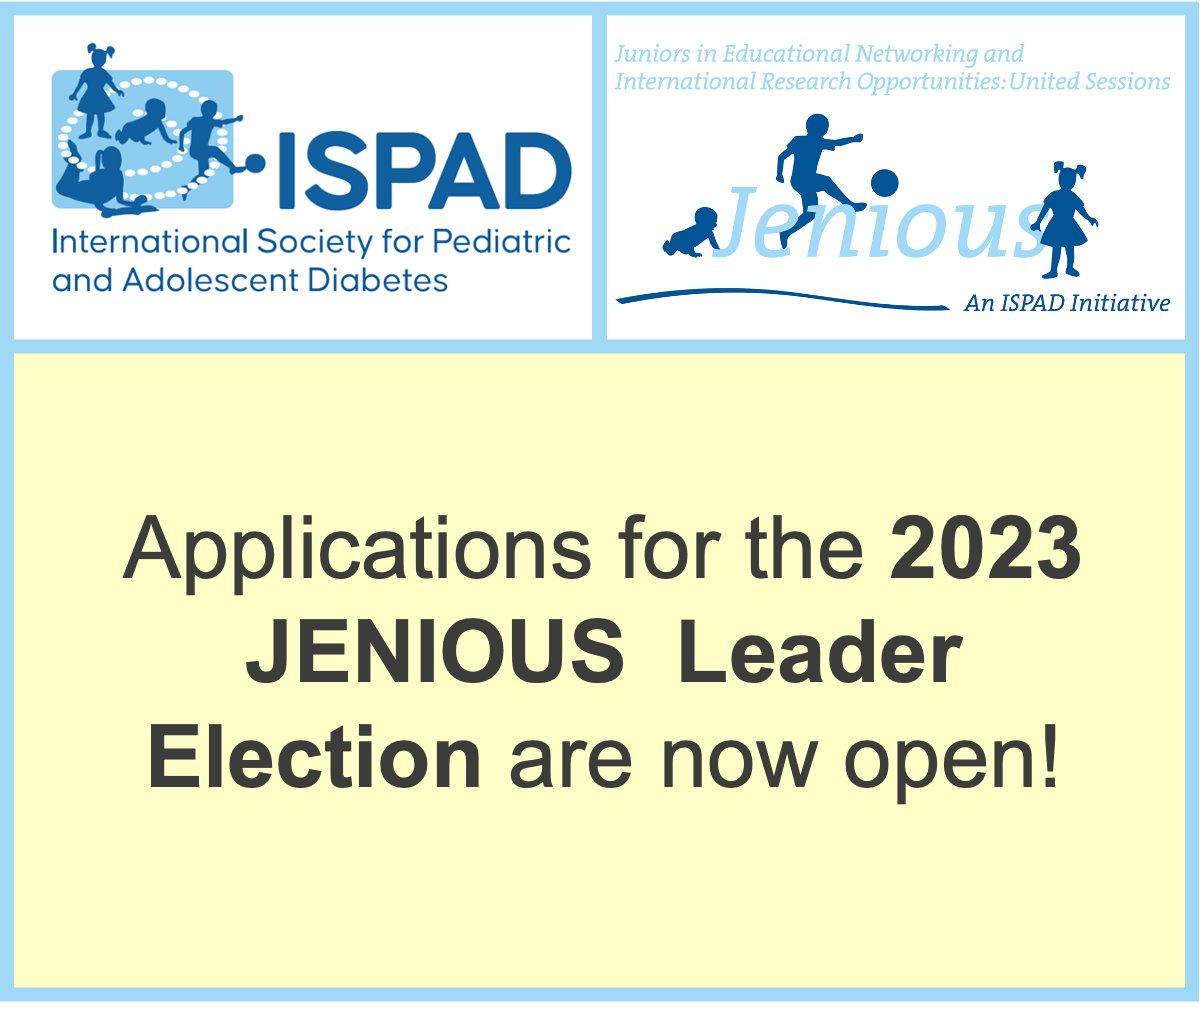 ⚠️ You can still apply for the 2023 JENIOUS Leader Election! The new elected leader will serve for the period 2024-2026. Visit loom.ly/6koHJuY for more information. Applications will close on October 29, 2023!